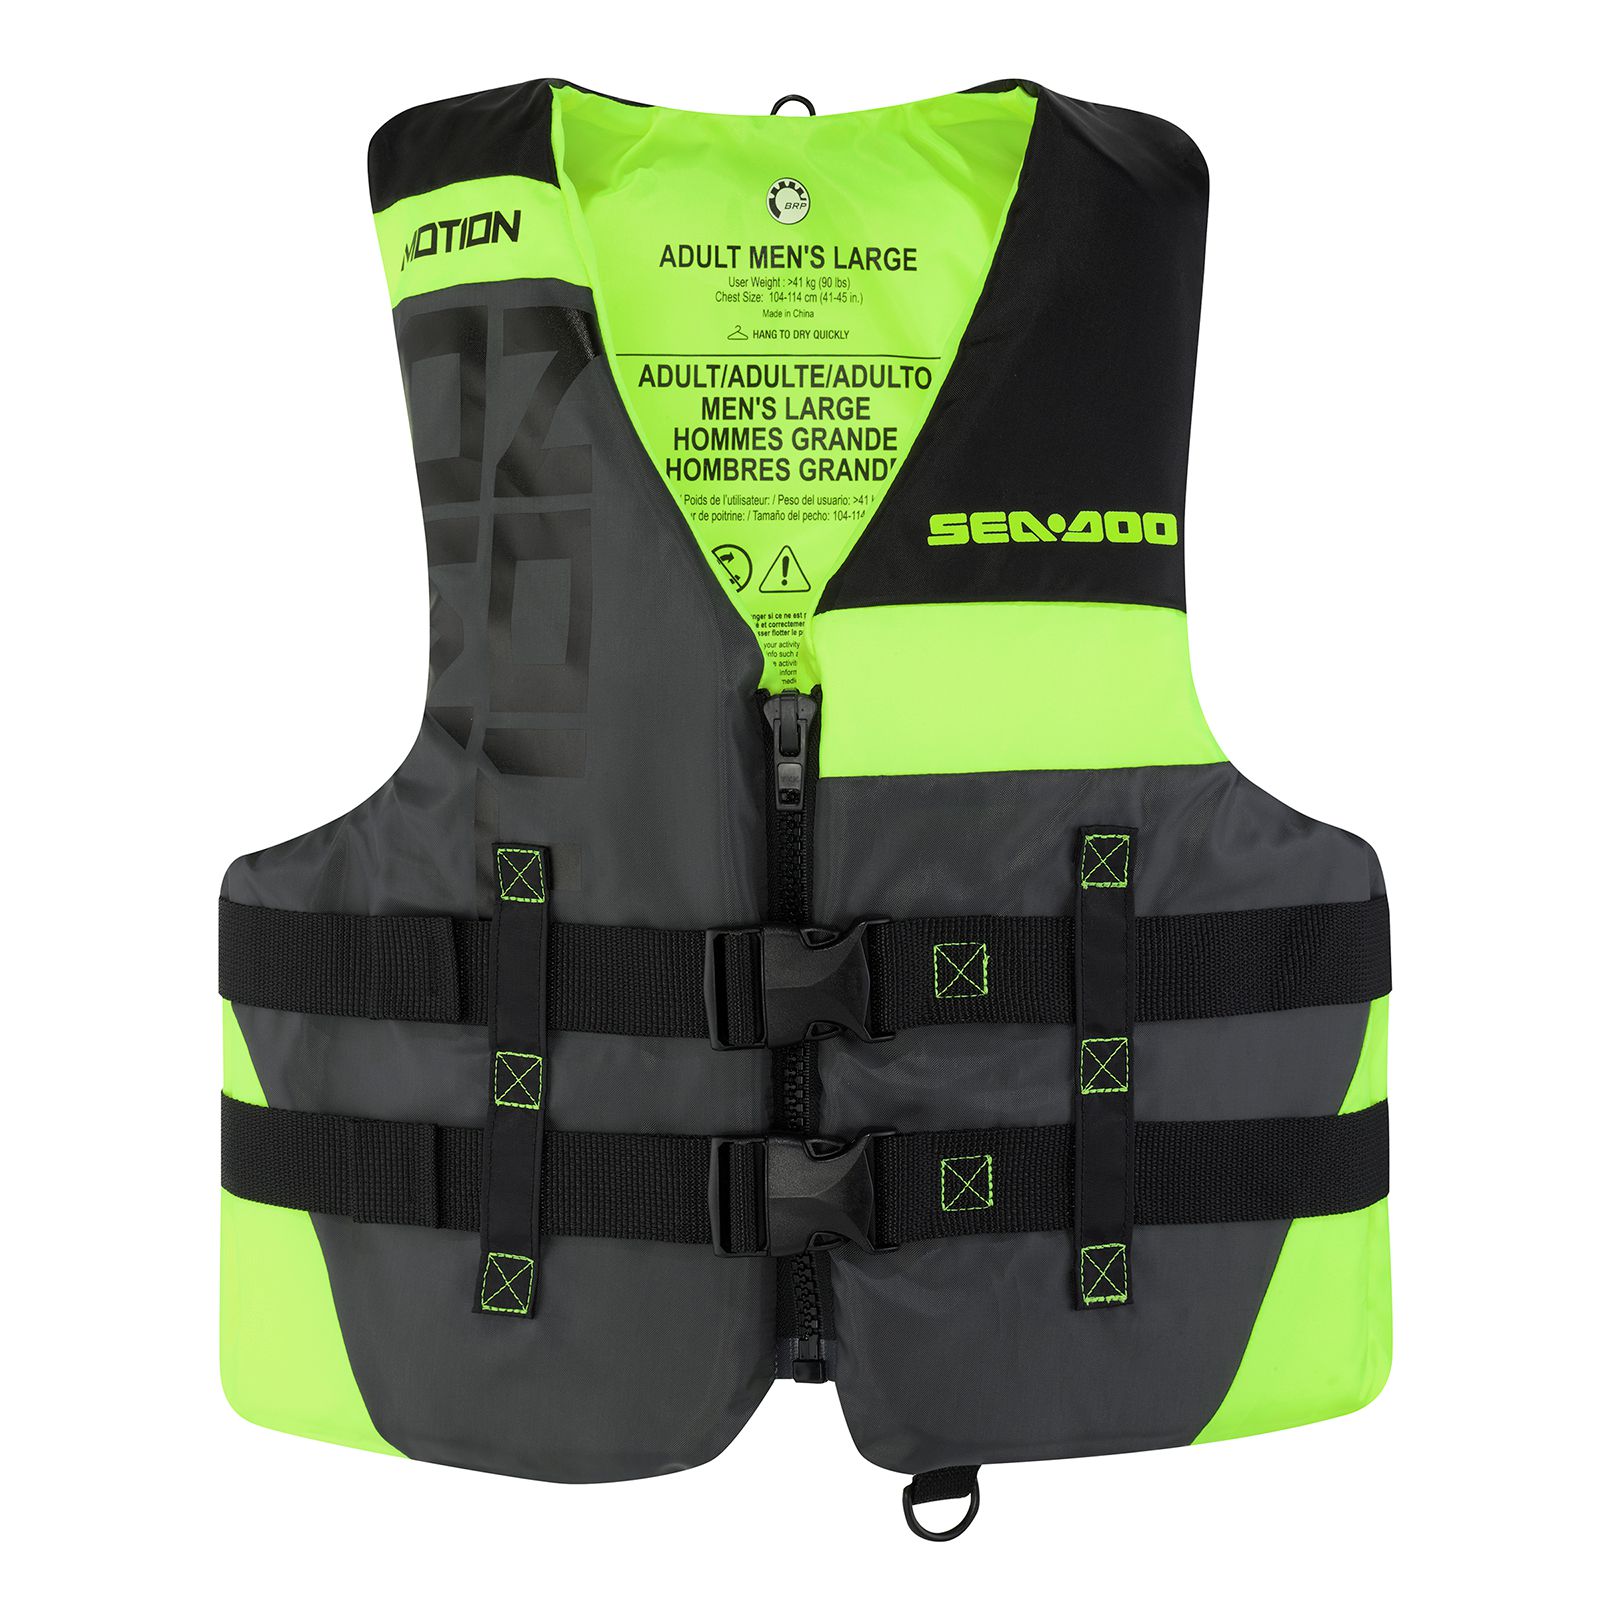 Life Jacket Vest Swimming Adult kid PFD 3 colors Fully Enclosed Size S M L XL 